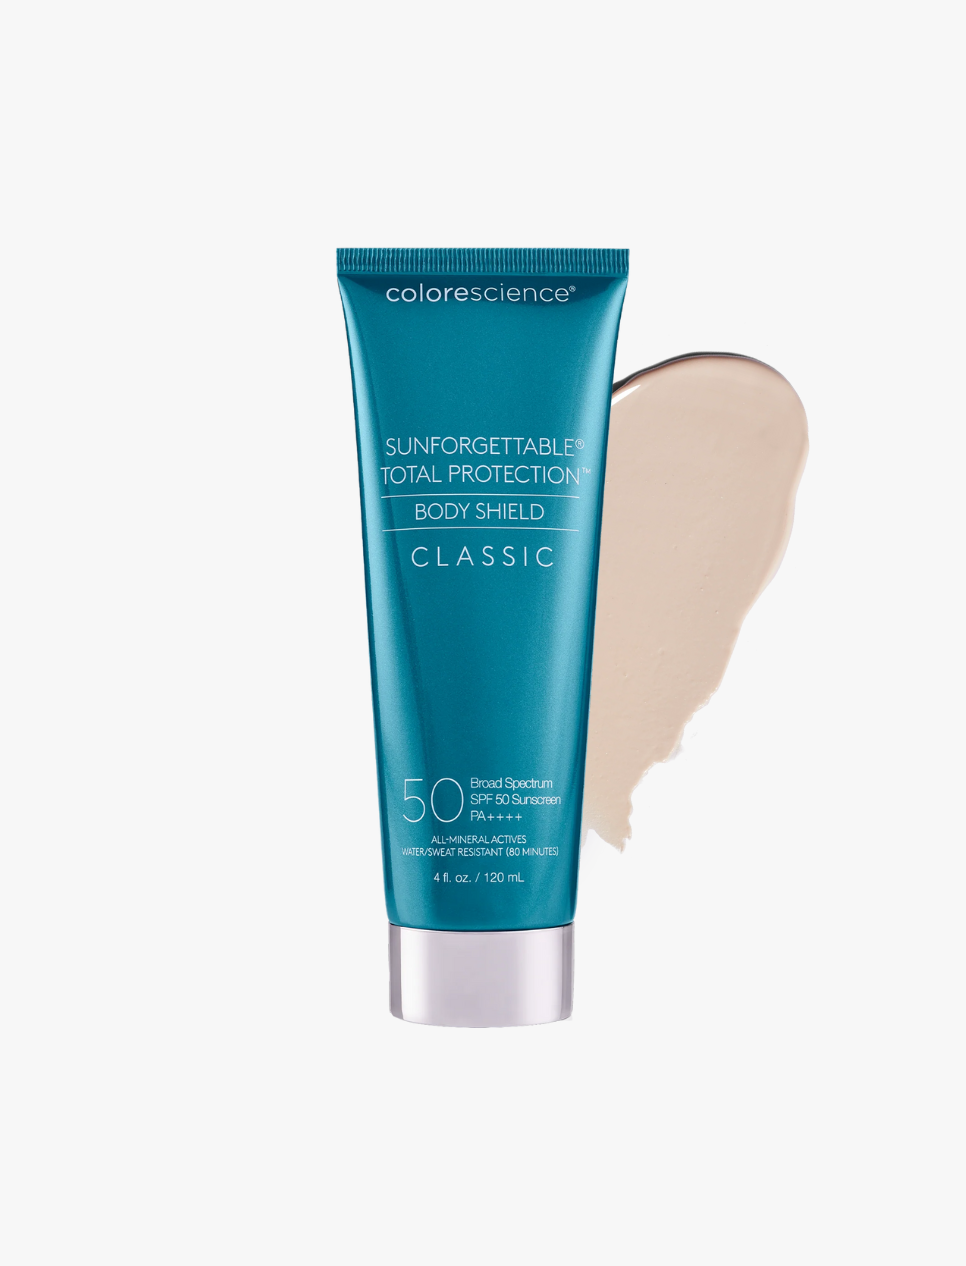 SUNFORGETTABLE TOTAL PROTECTION BODY SHIELD CLASSIC SPF 50+